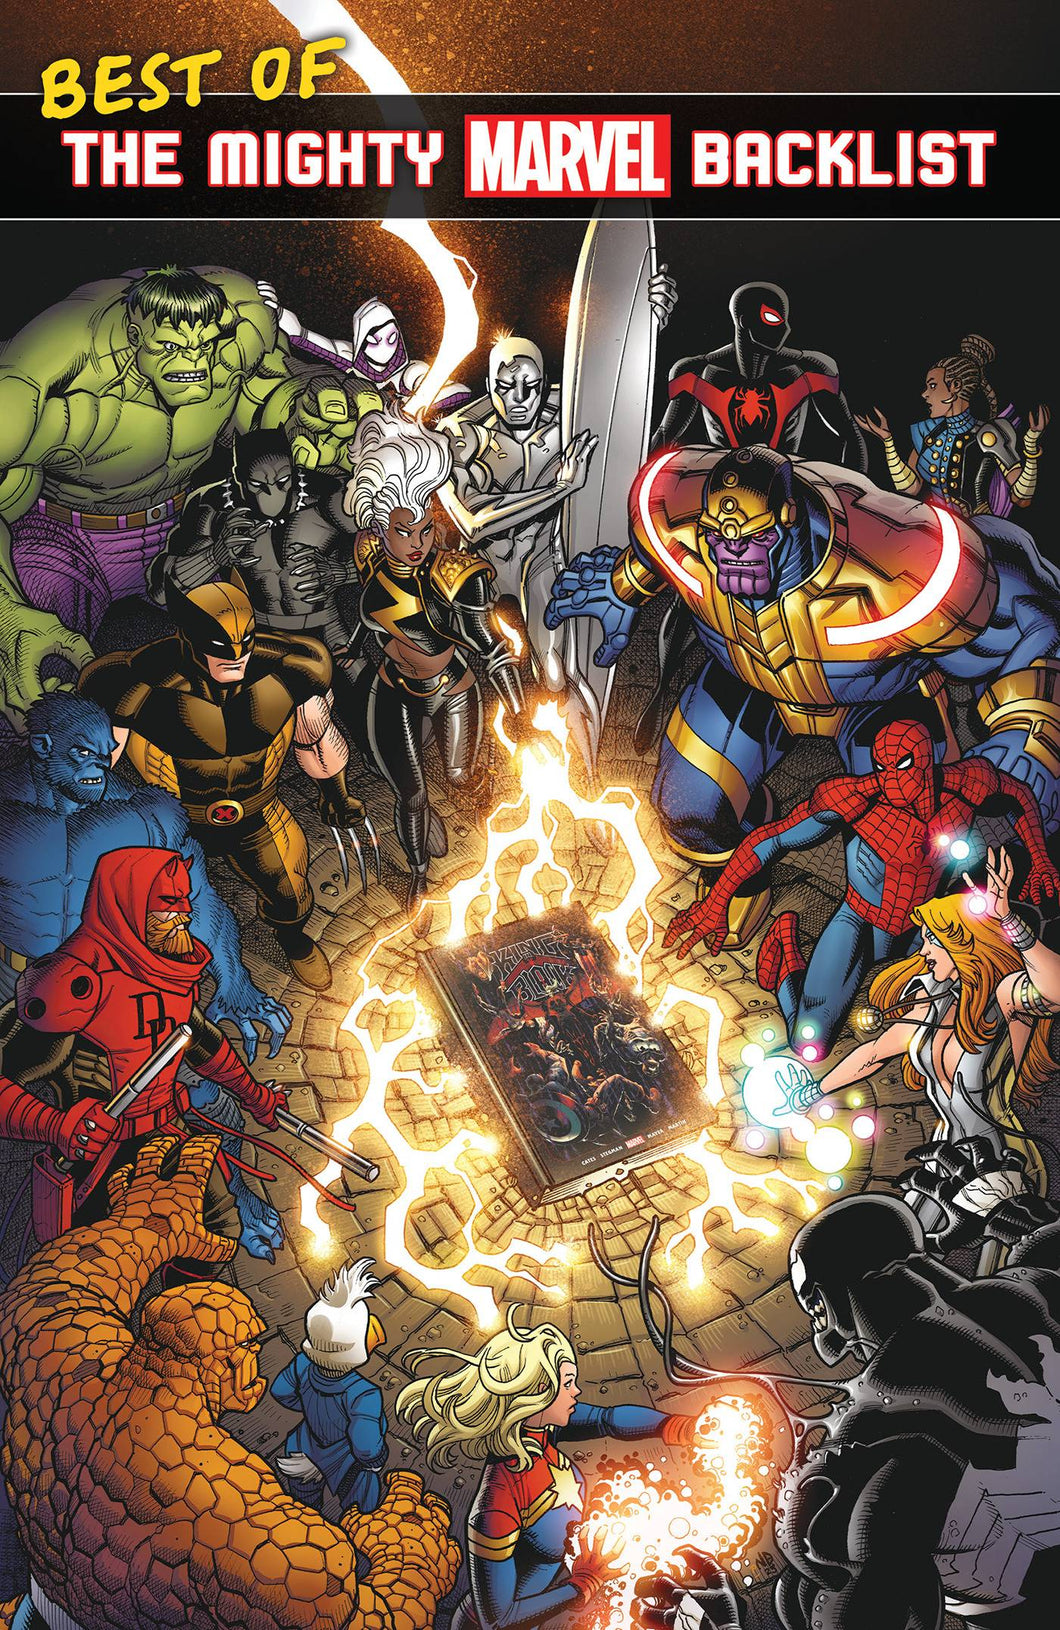 Best of the Might Marvel Backlist